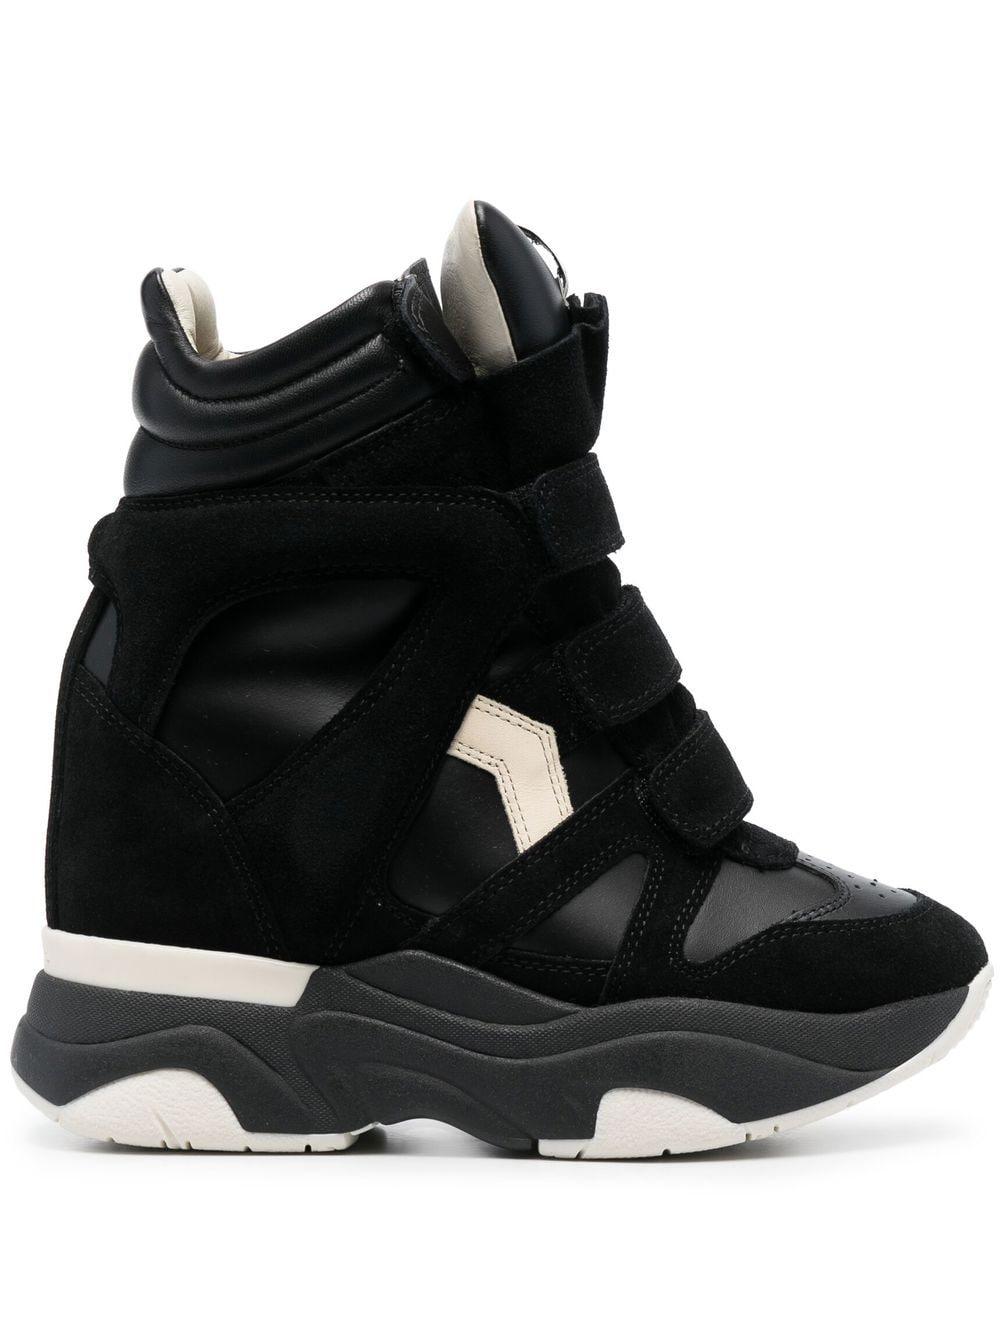 Isabel Marant Balskee High-top Leather Sneakers in Black | Lyst